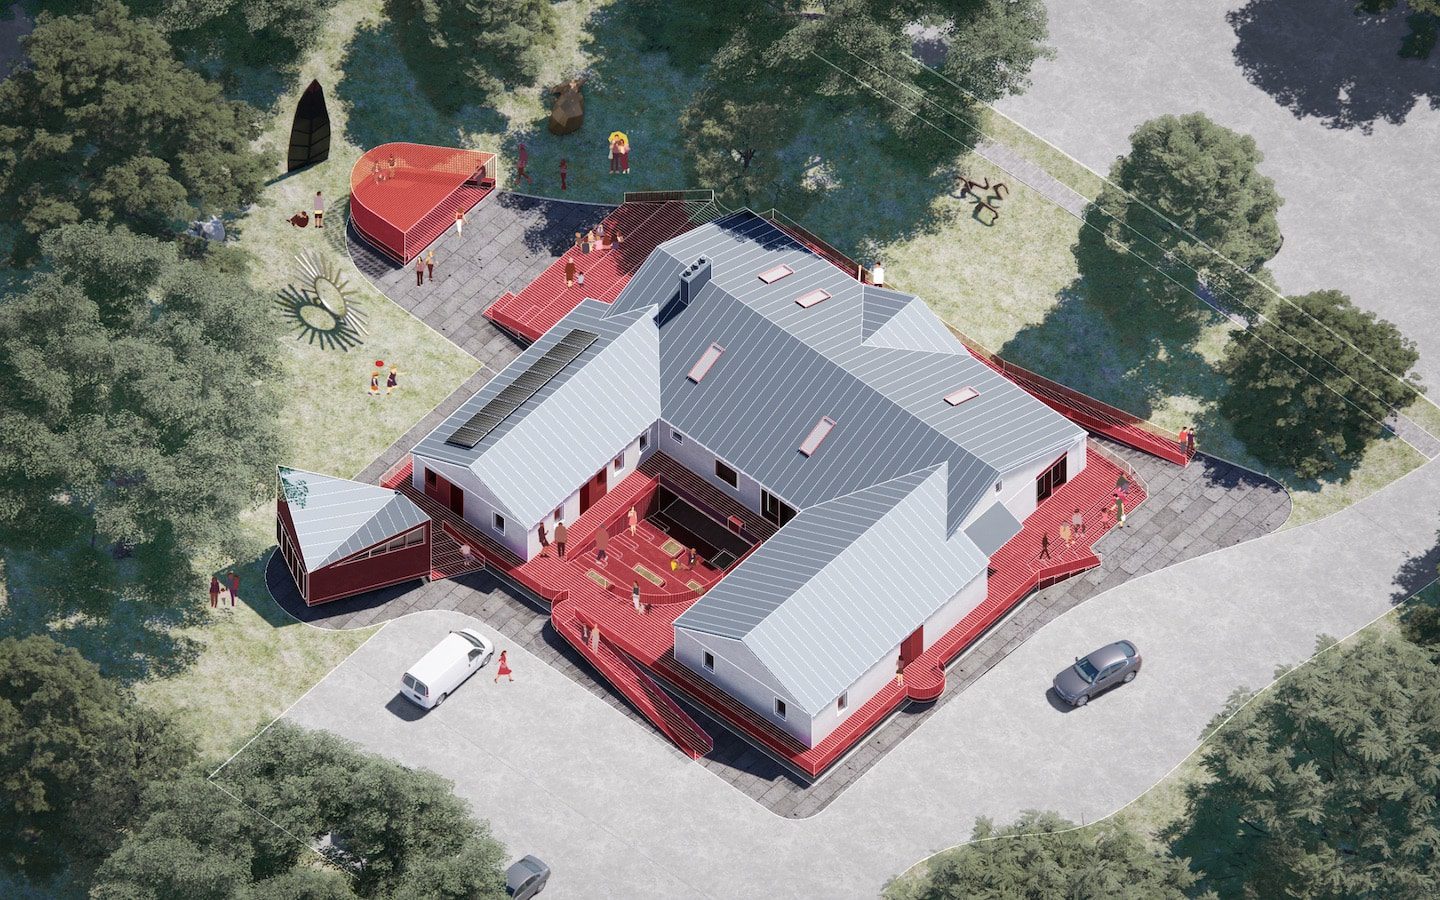 An aerial view of a red house in the woods.